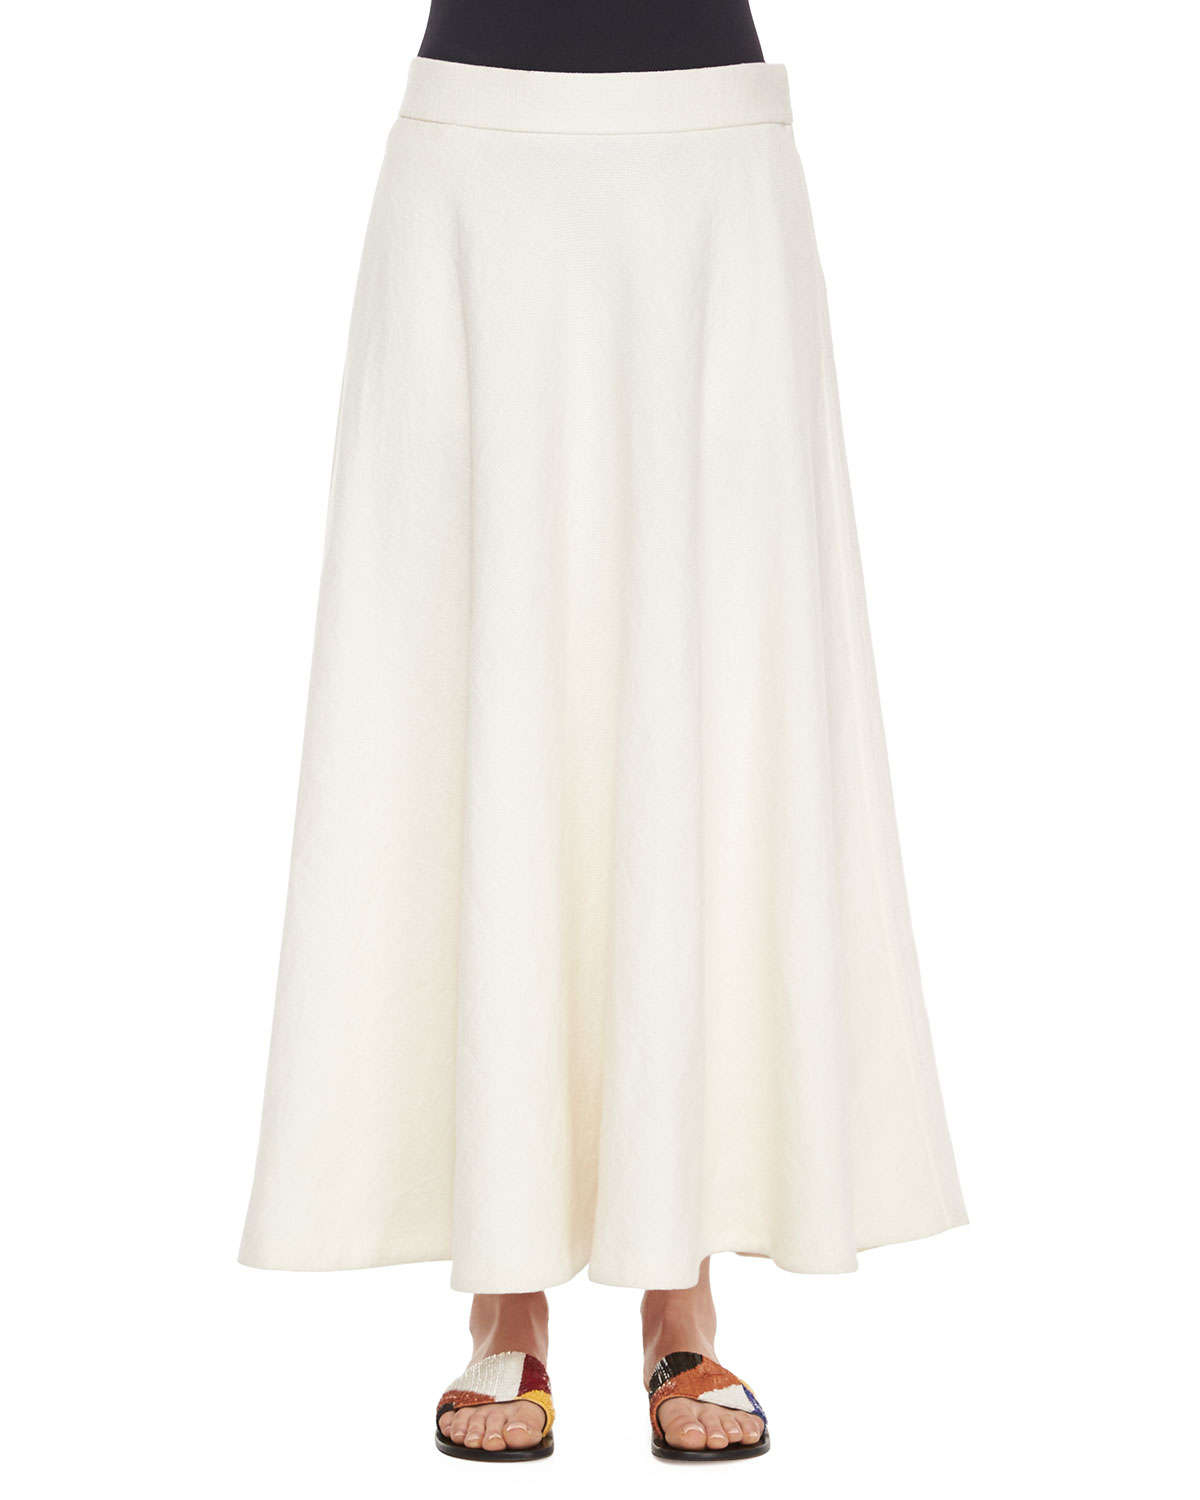 Lyst - The Row Linen Long Circle Skirt in White